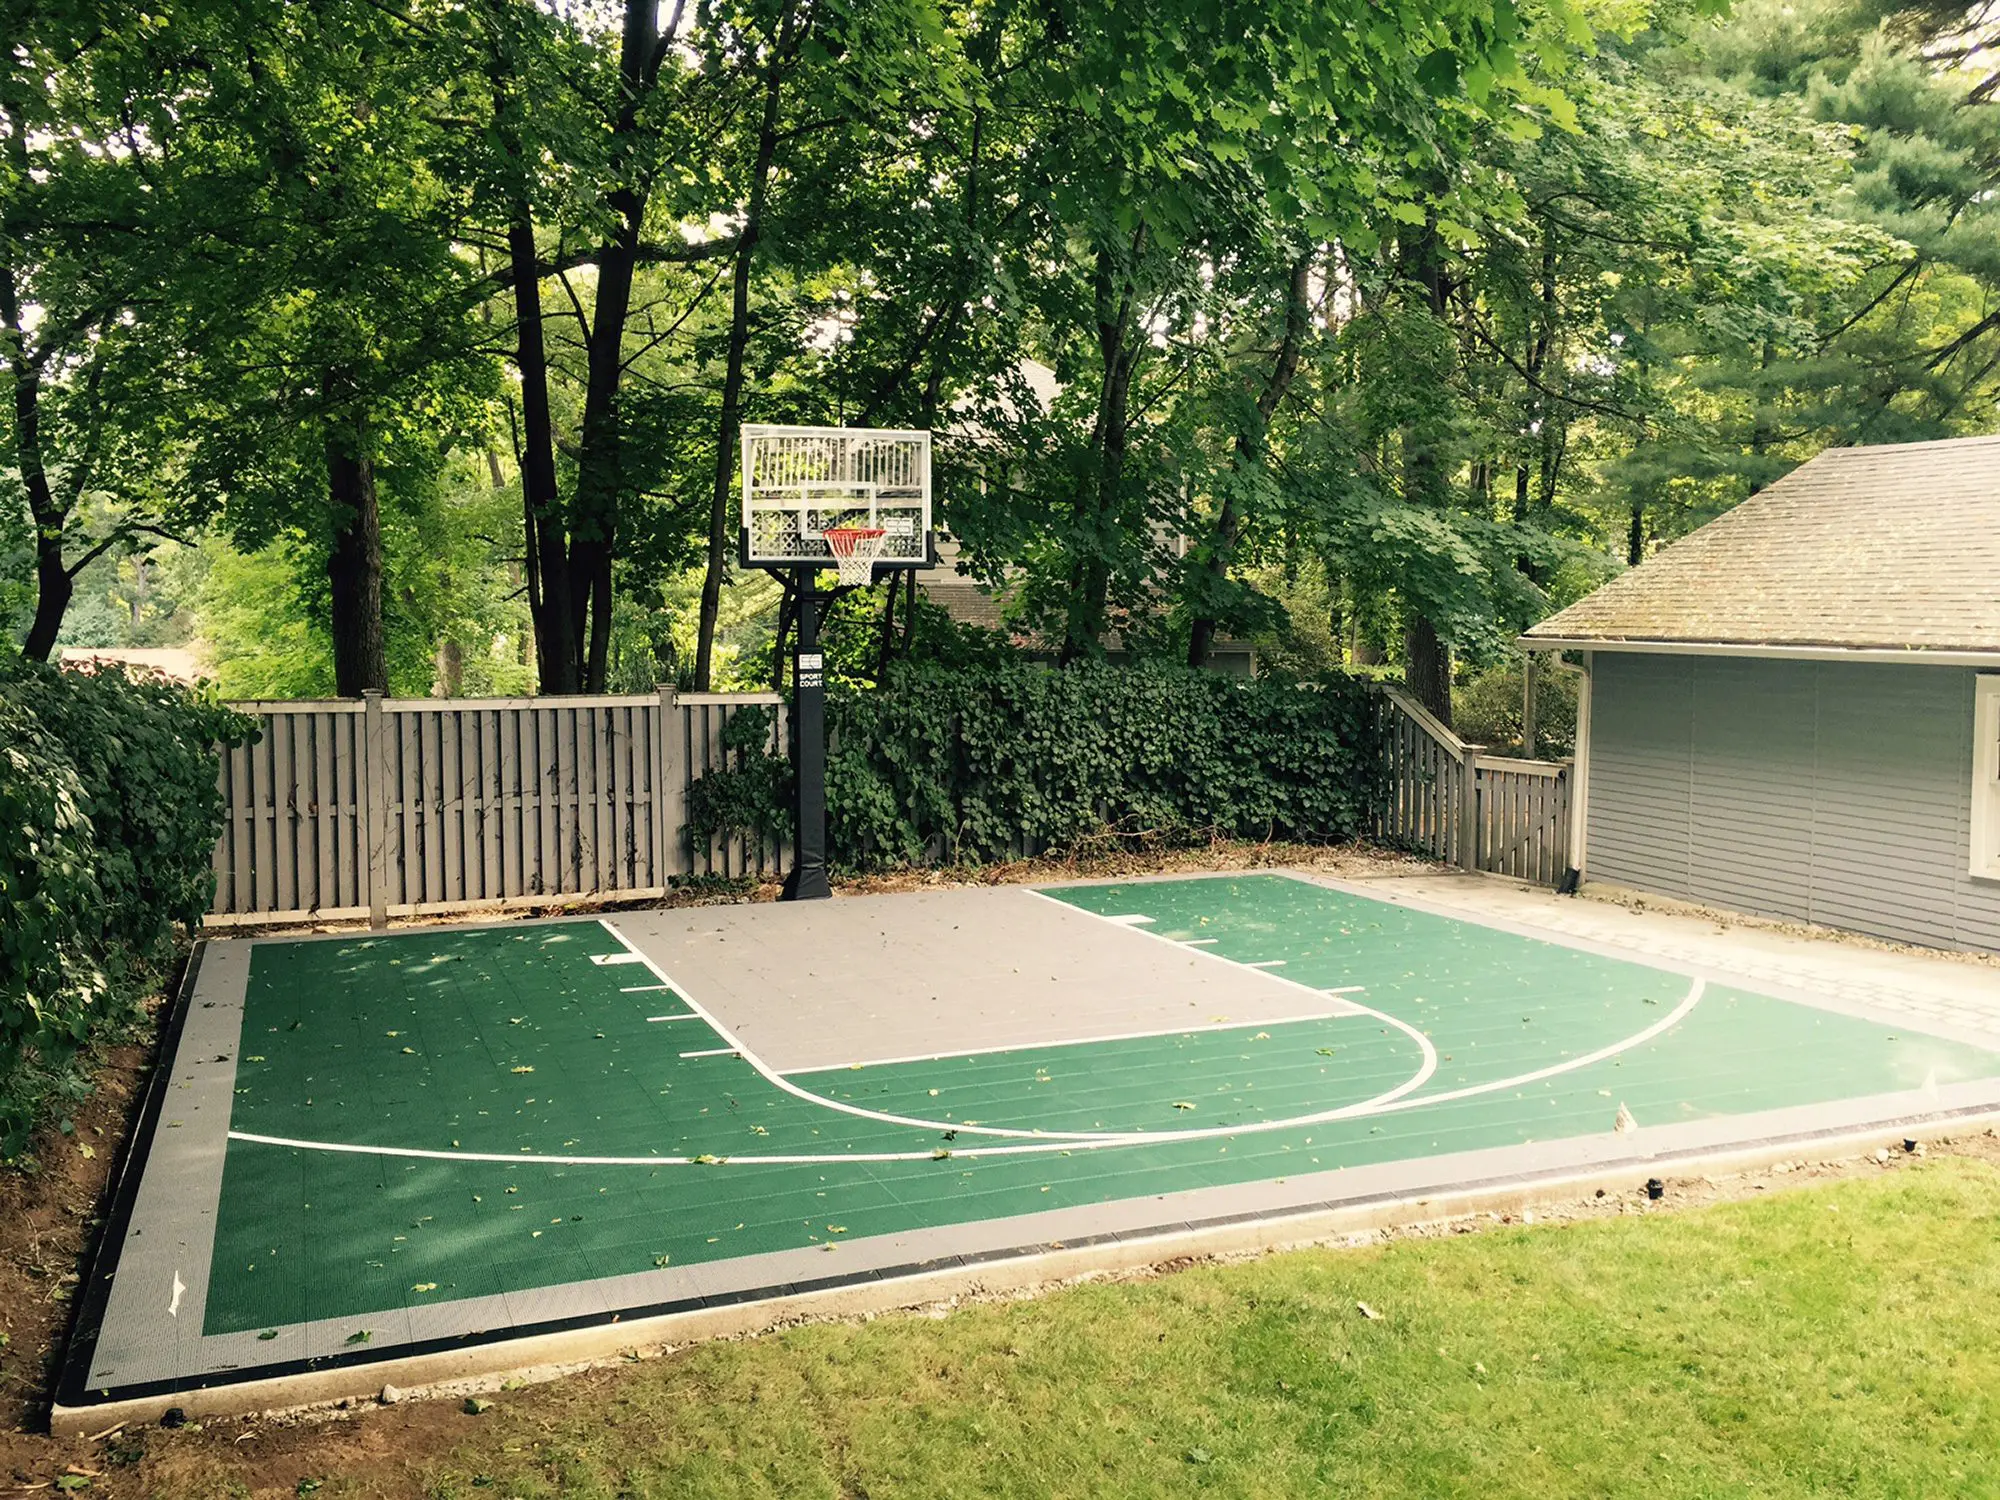 Outdoor Basketball Court Construction: Best Practices & Costs